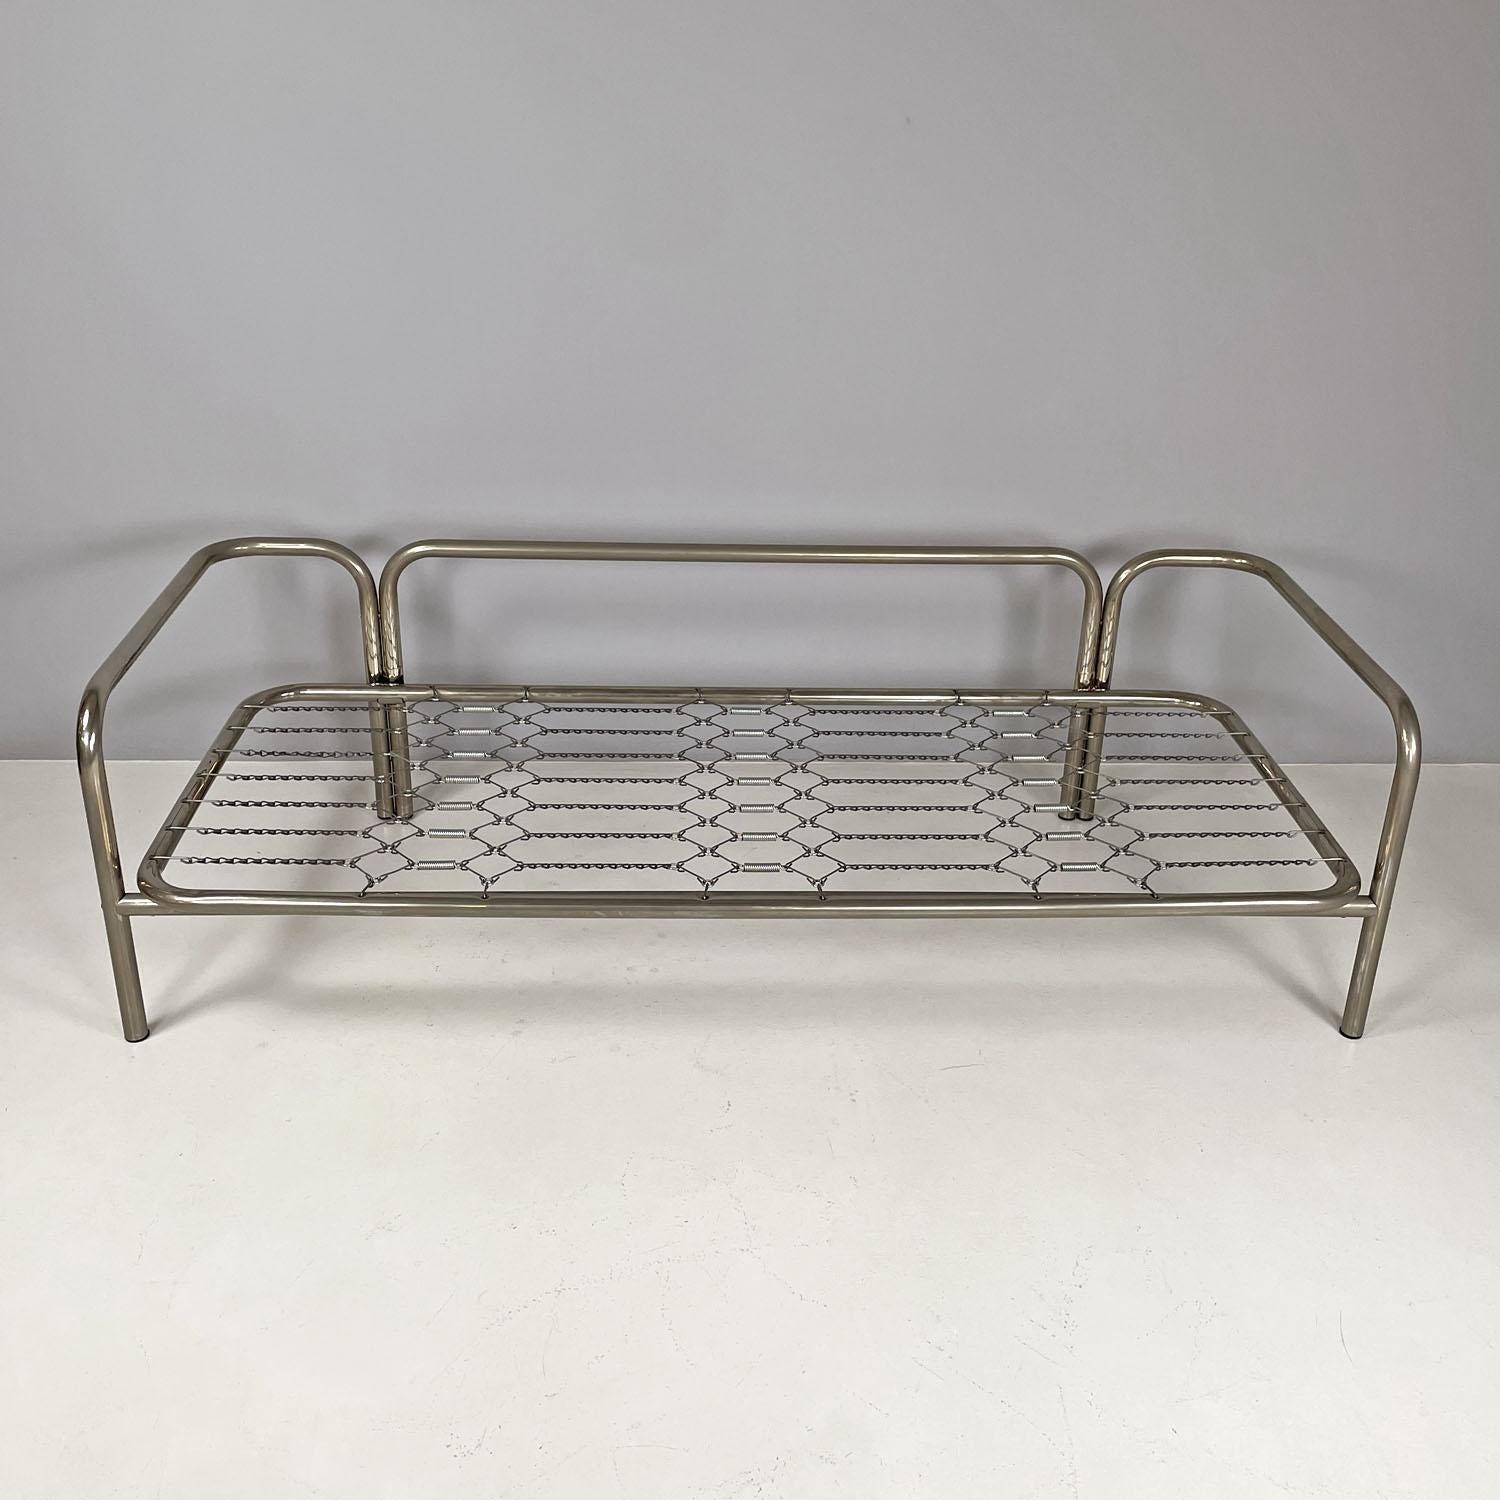 Modern Italian modern daybed sofa Locus Solus by Gae Aulenti for Poltronova, 1970s For Sale